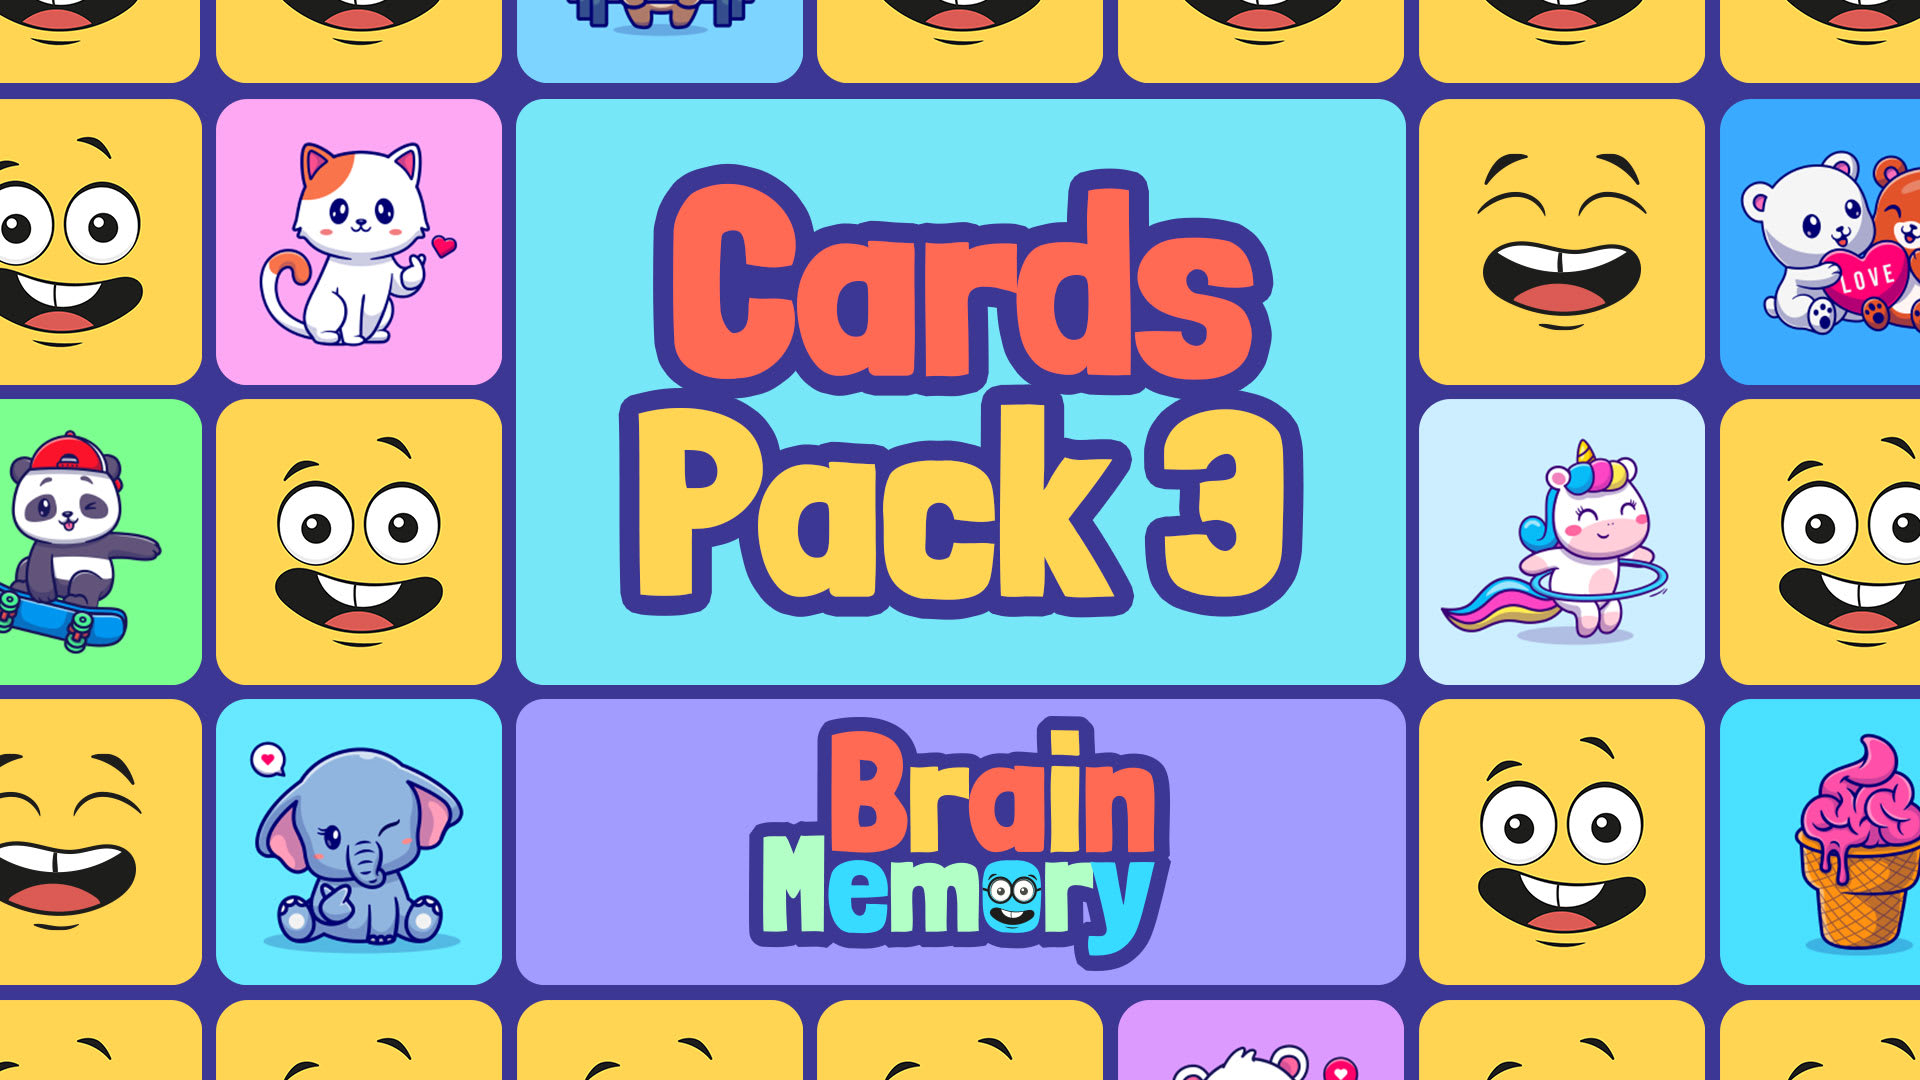 Cards Pack 3